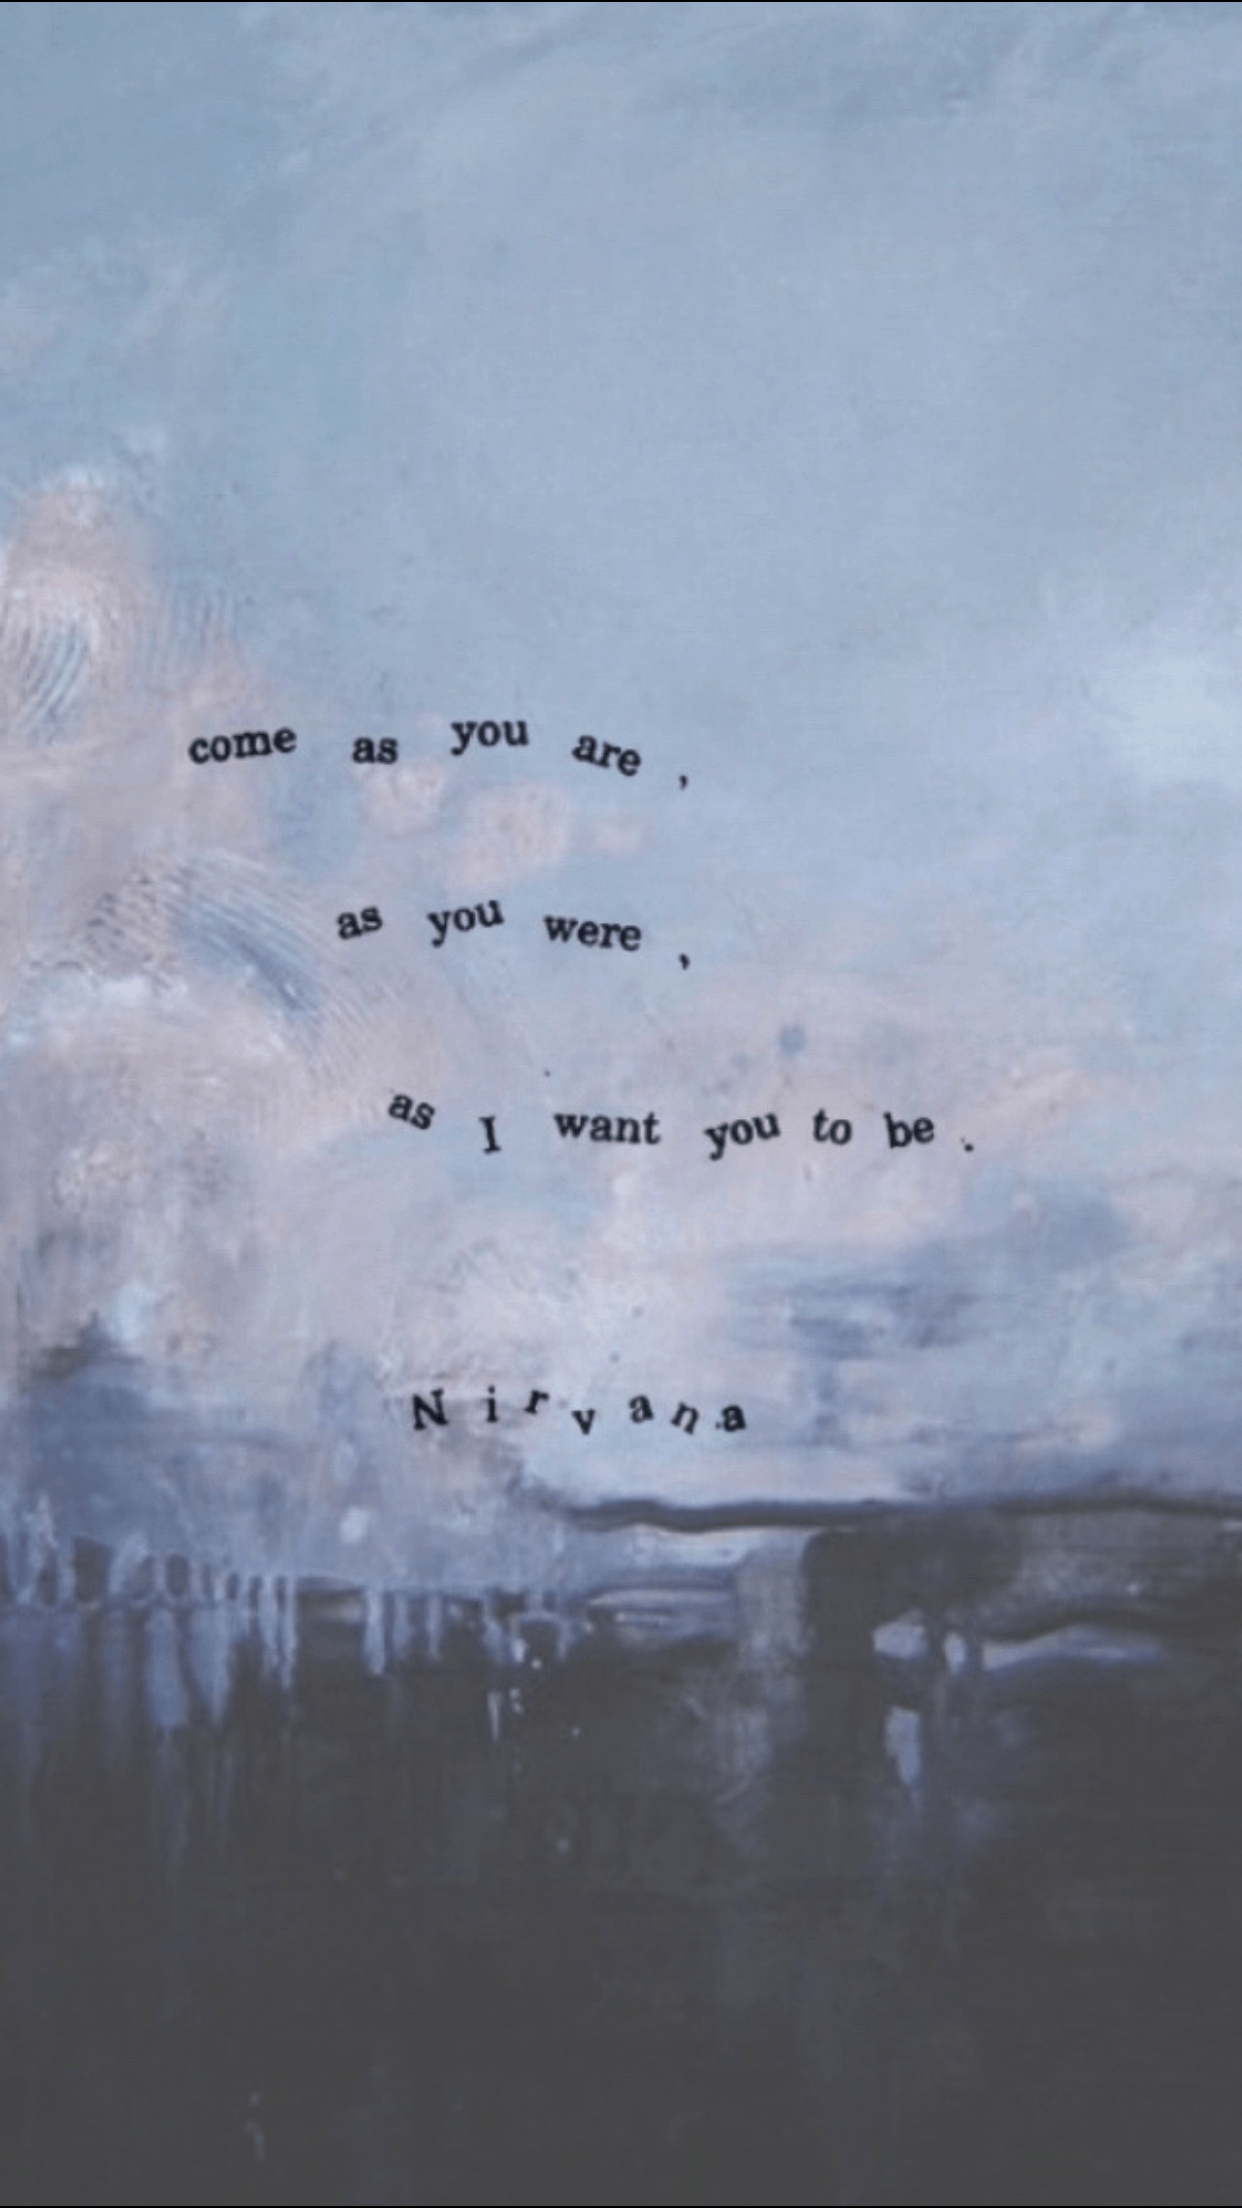 A painting with words on it - Nirvana